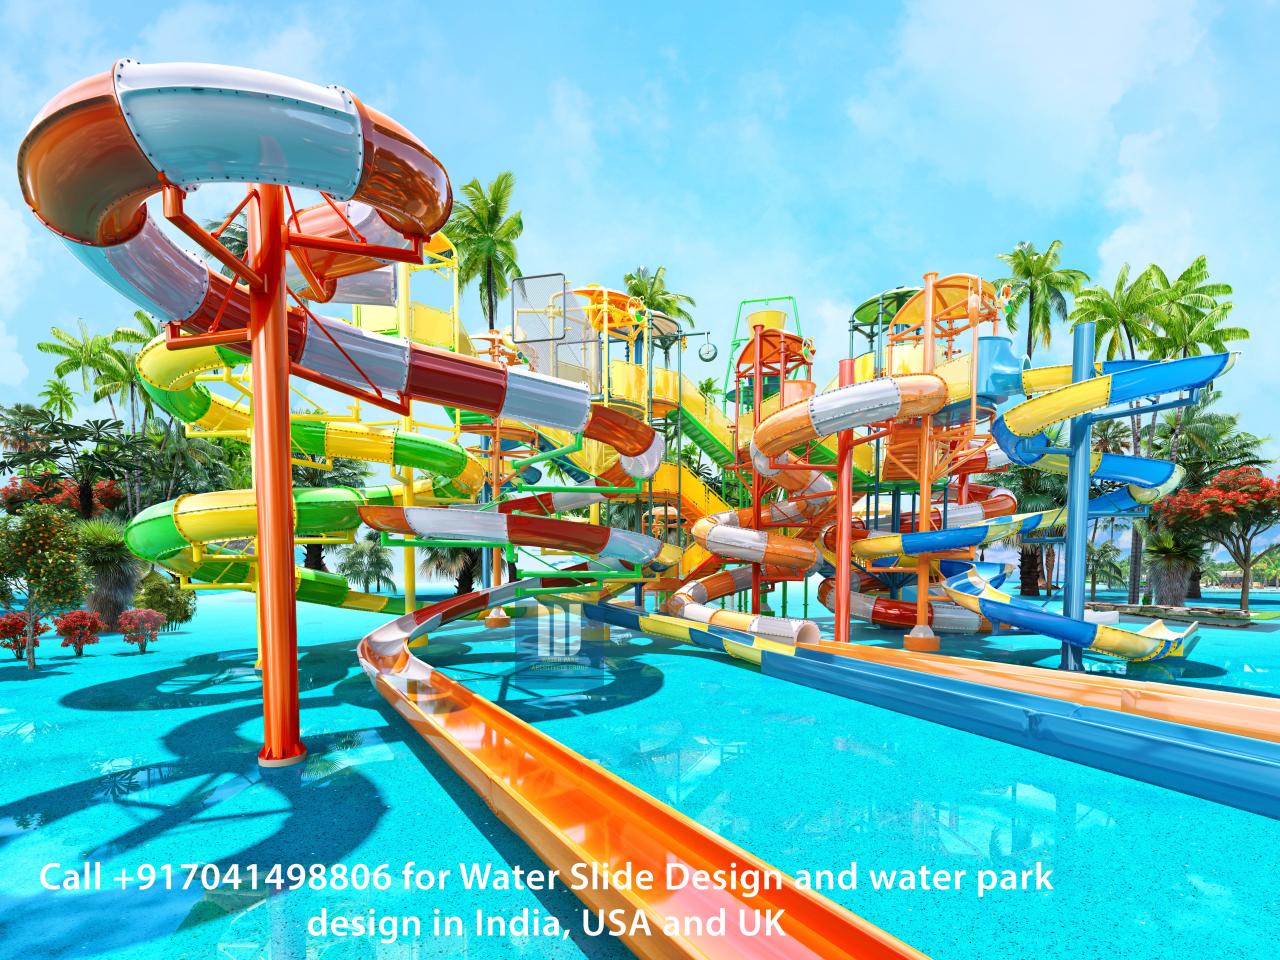 Tips for Water Park